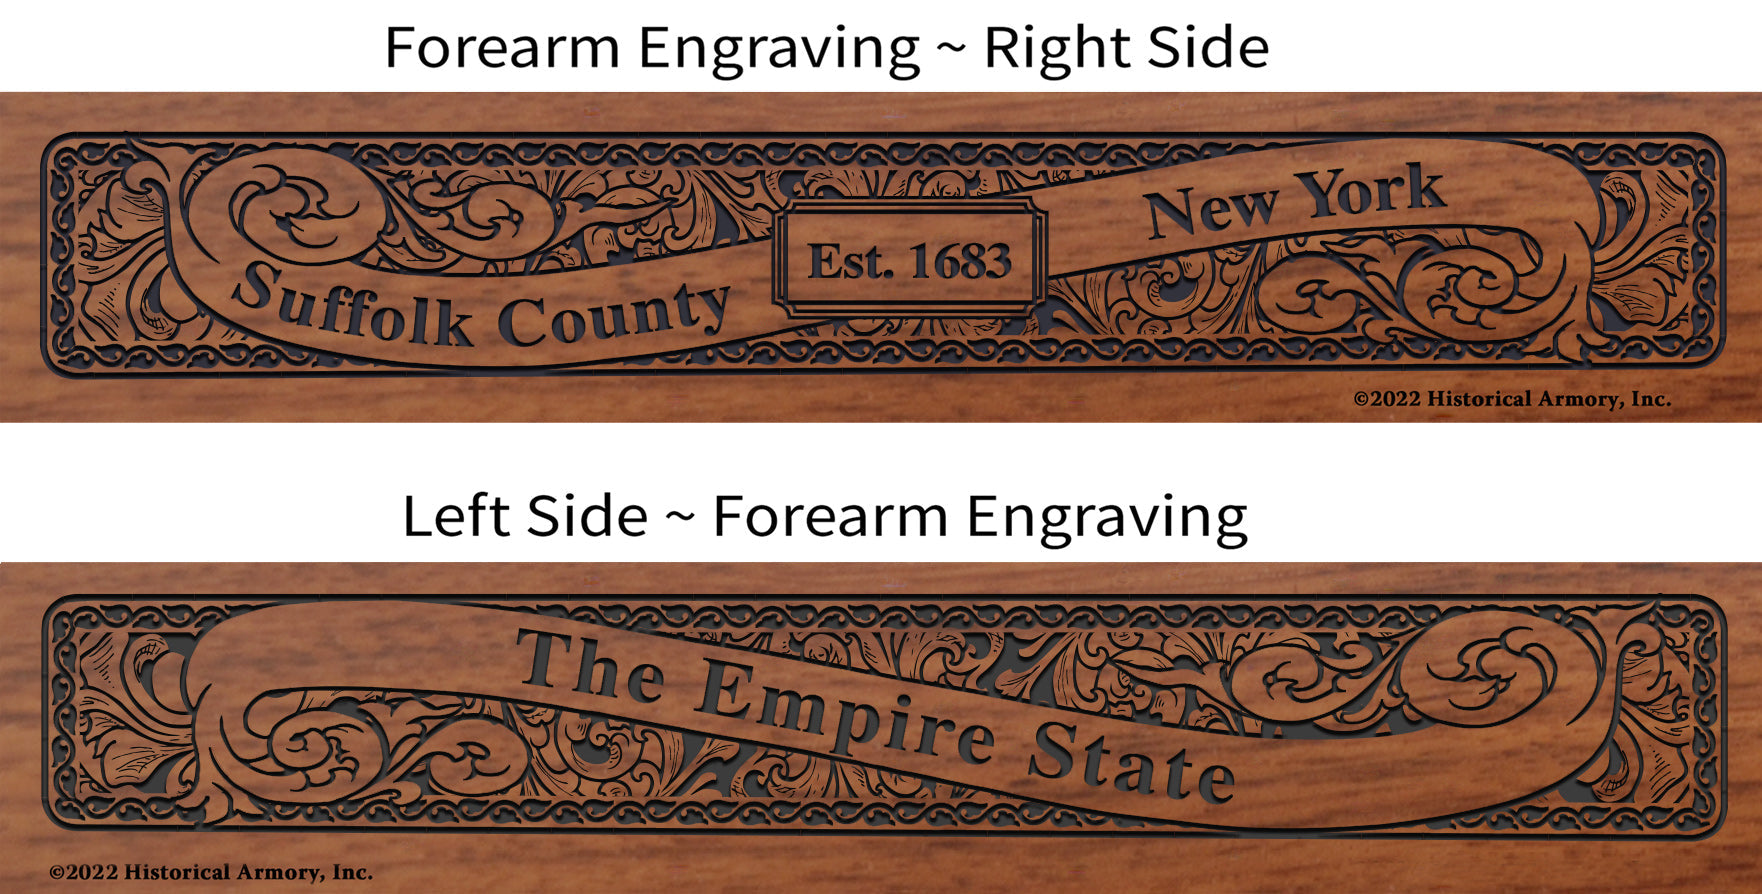 Suffolk County New York Engraved Rifle Forearm